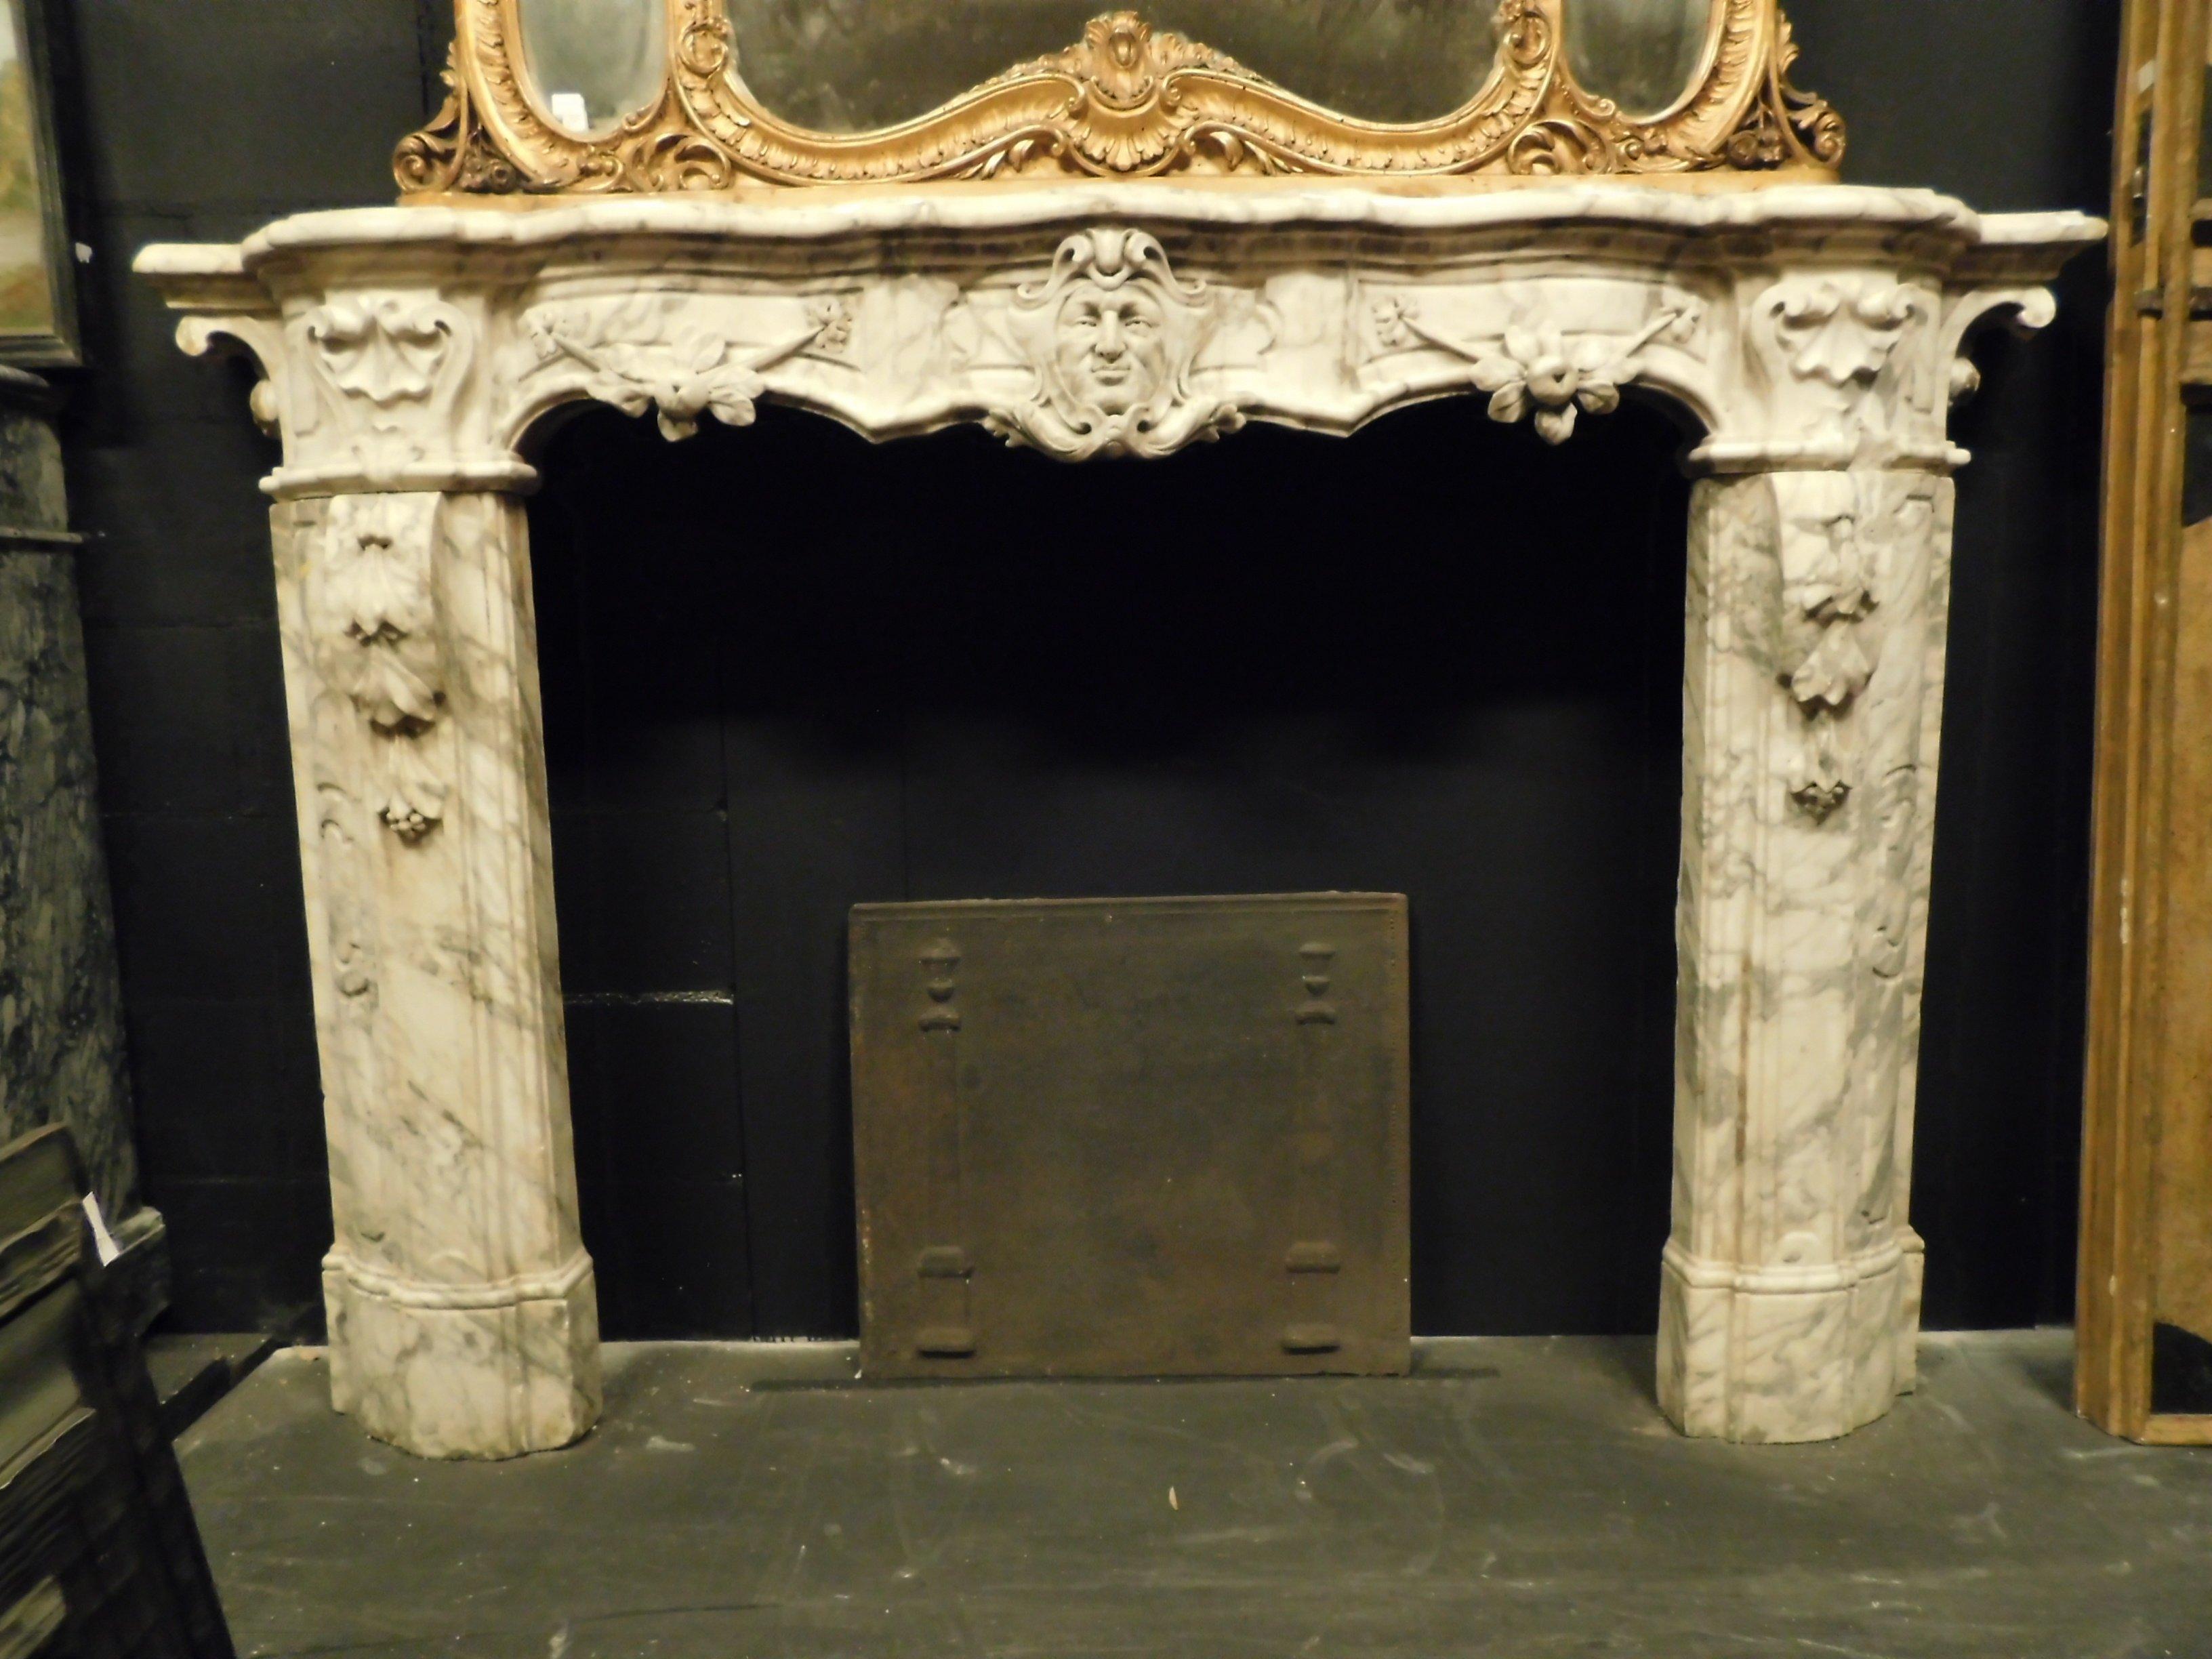 Ancient Italian fireplace in white Carrara marble but veined gray, with carved mask and friezes on the uprights, very rich and with many moves, from movement to the room and heat, beautiful marble patina and the value of the sculpture makes it an